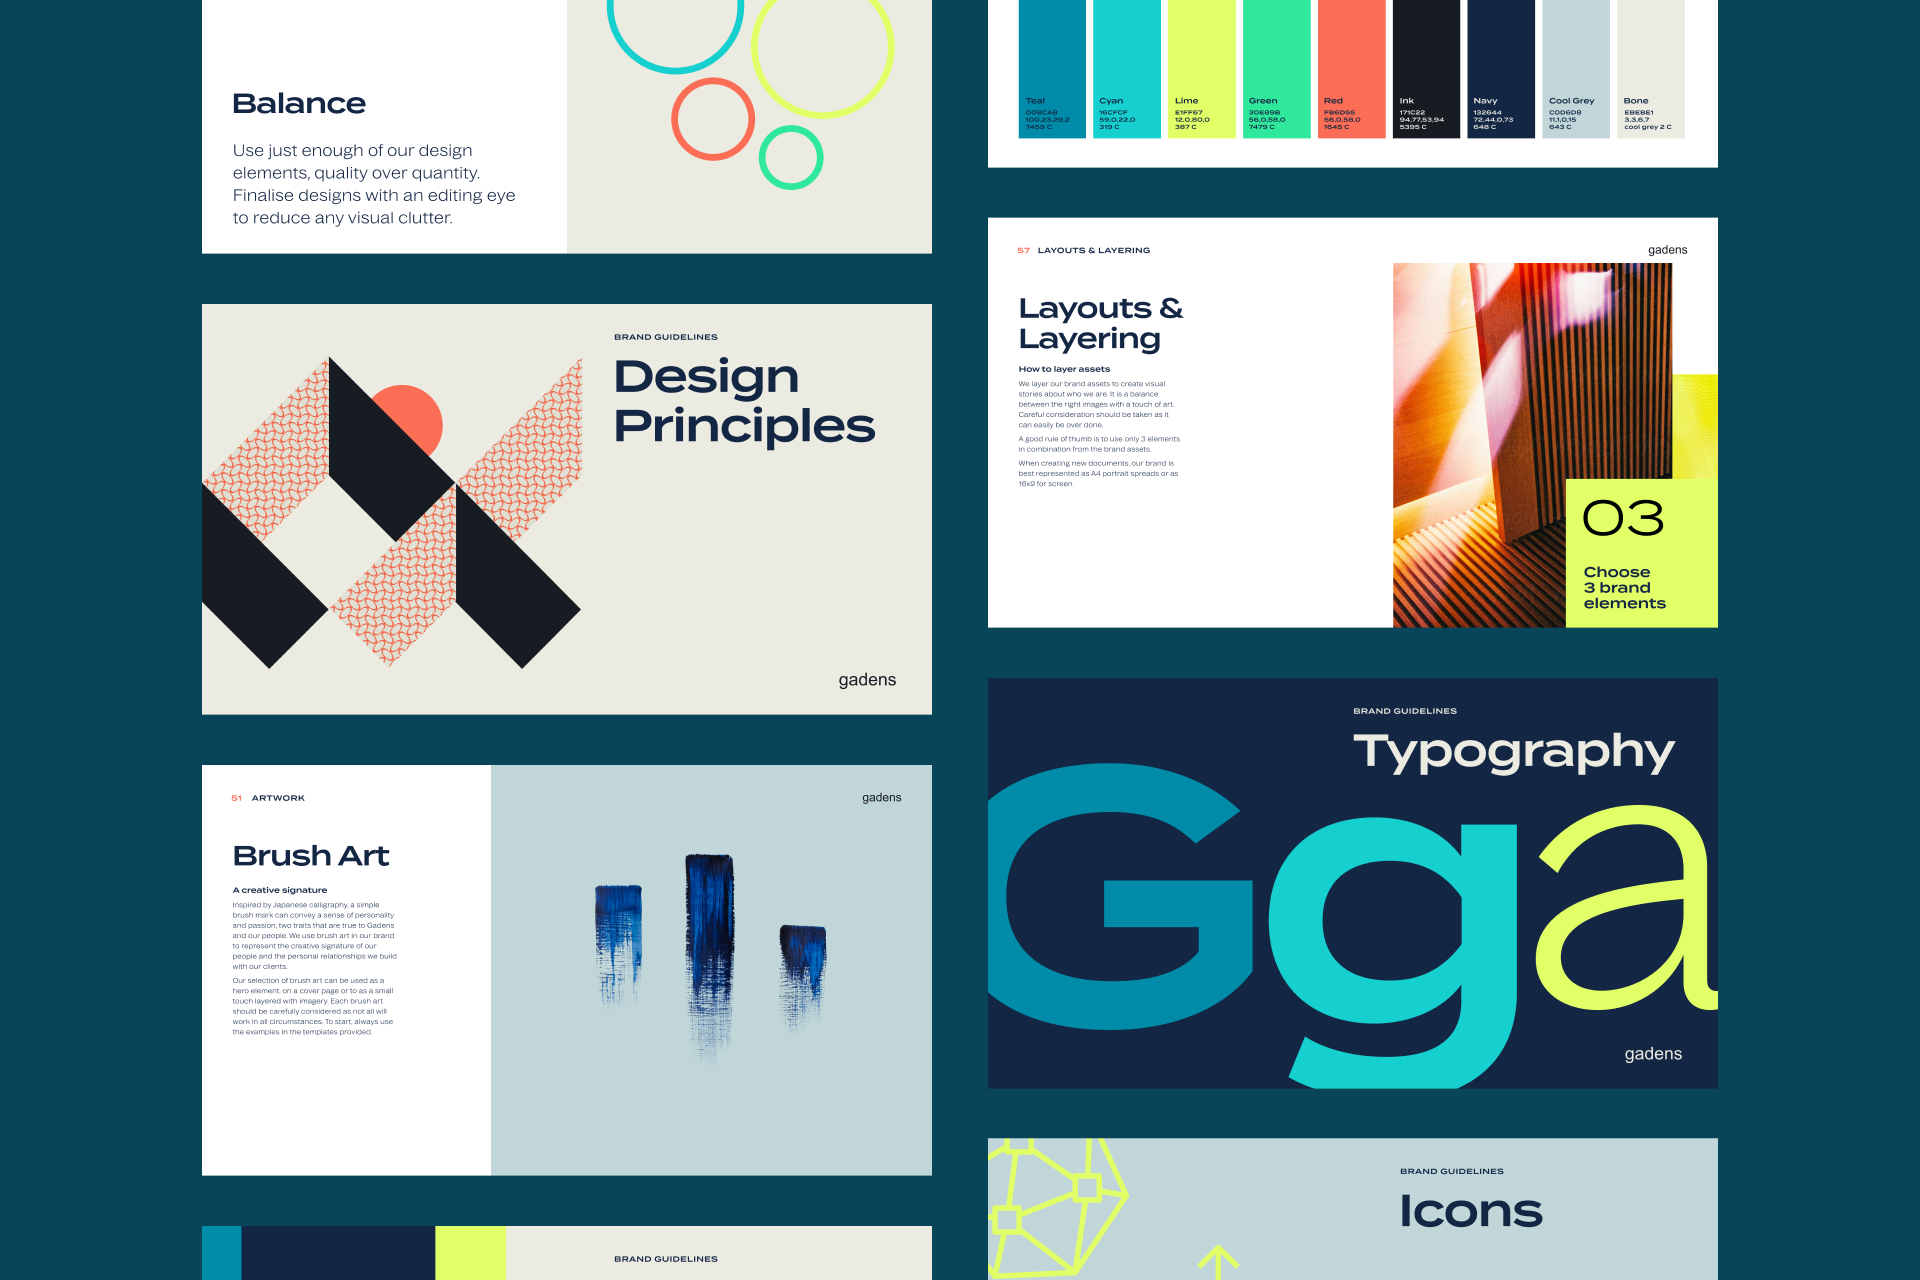 Pages from the Gadens brand styleguide